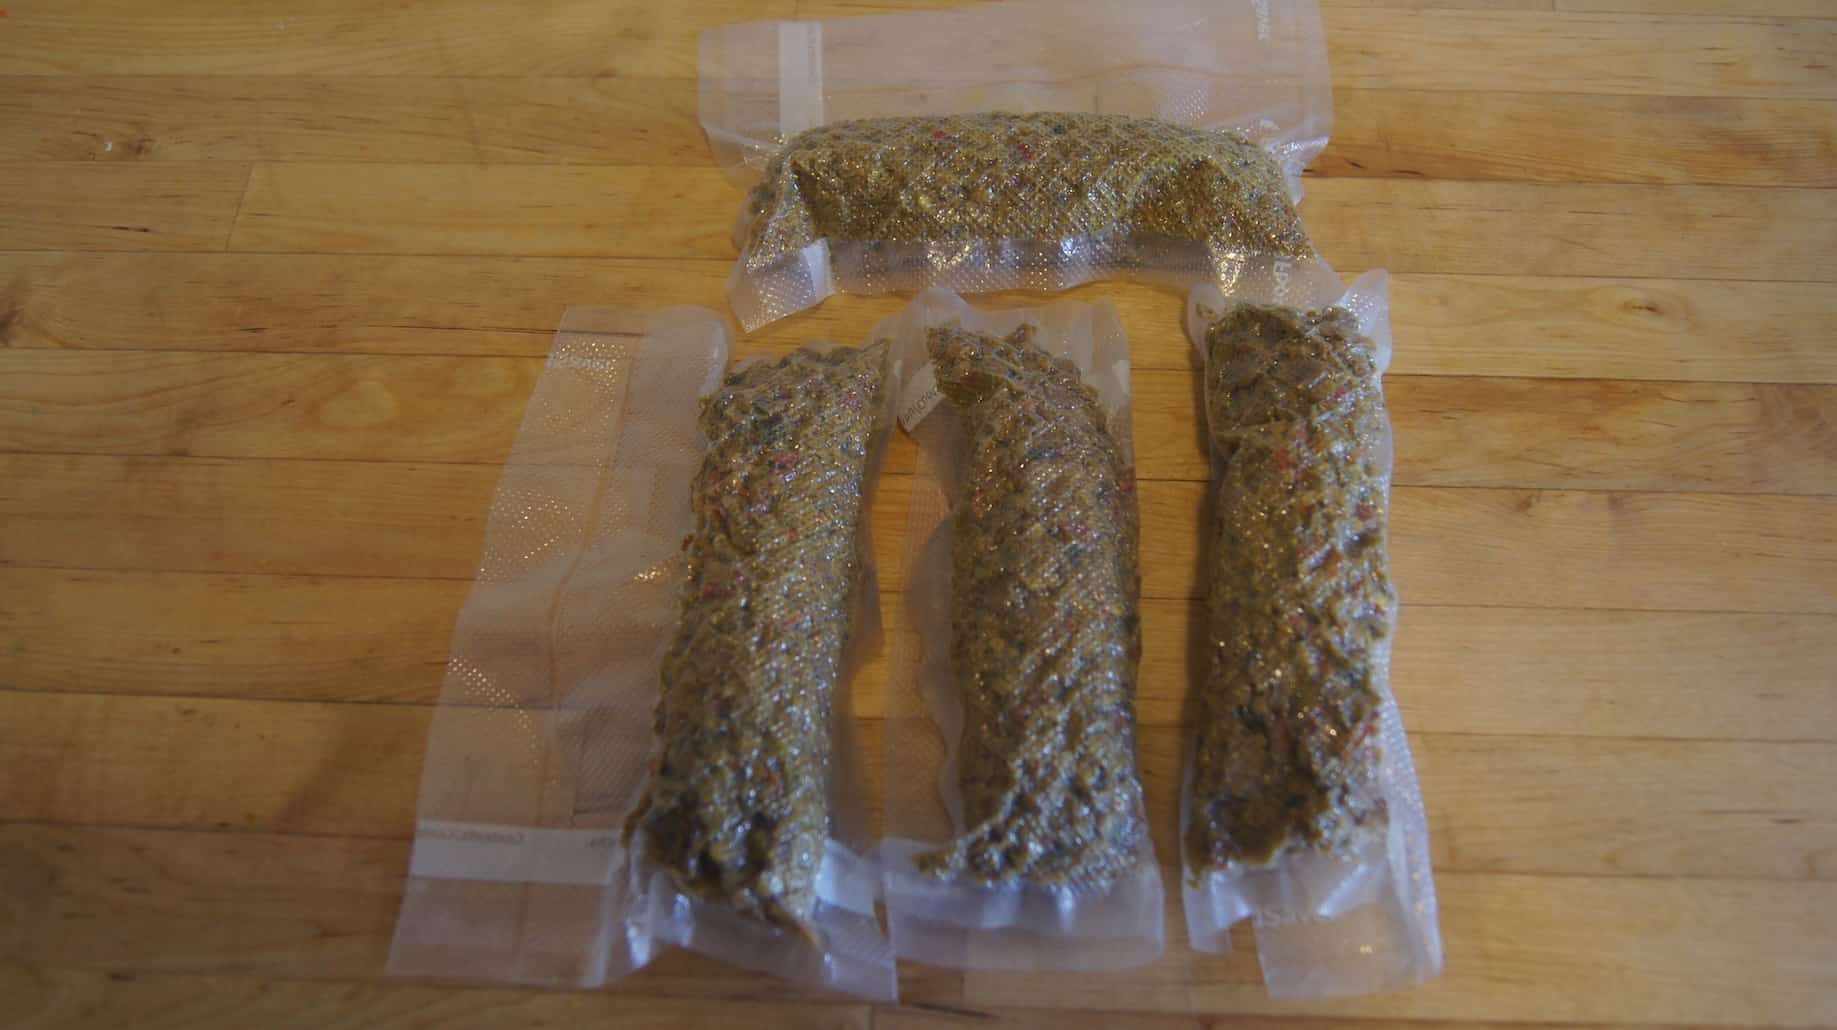 Downward view of four vacuum sealed bags of soup ingredients, on top of a wood countertop